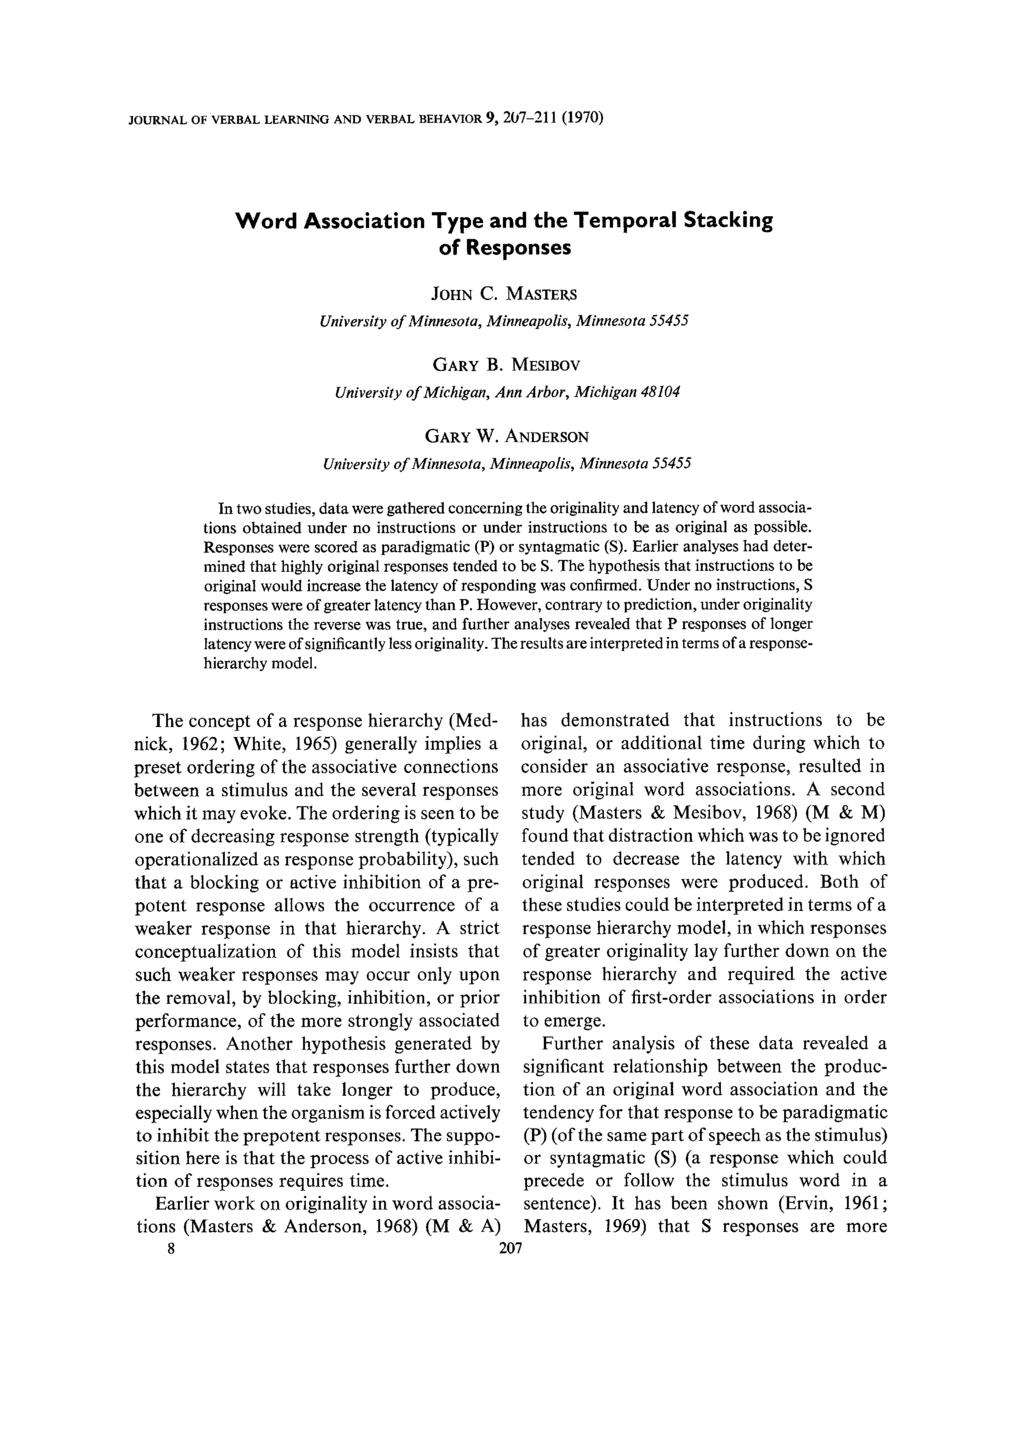 JOURNAL OF VERBAL LEARNING AND VERBAL BEHAVIOR 9, 207-211 (1970) Word Association Type and the Temporal Stacking of Responses JOHN C.